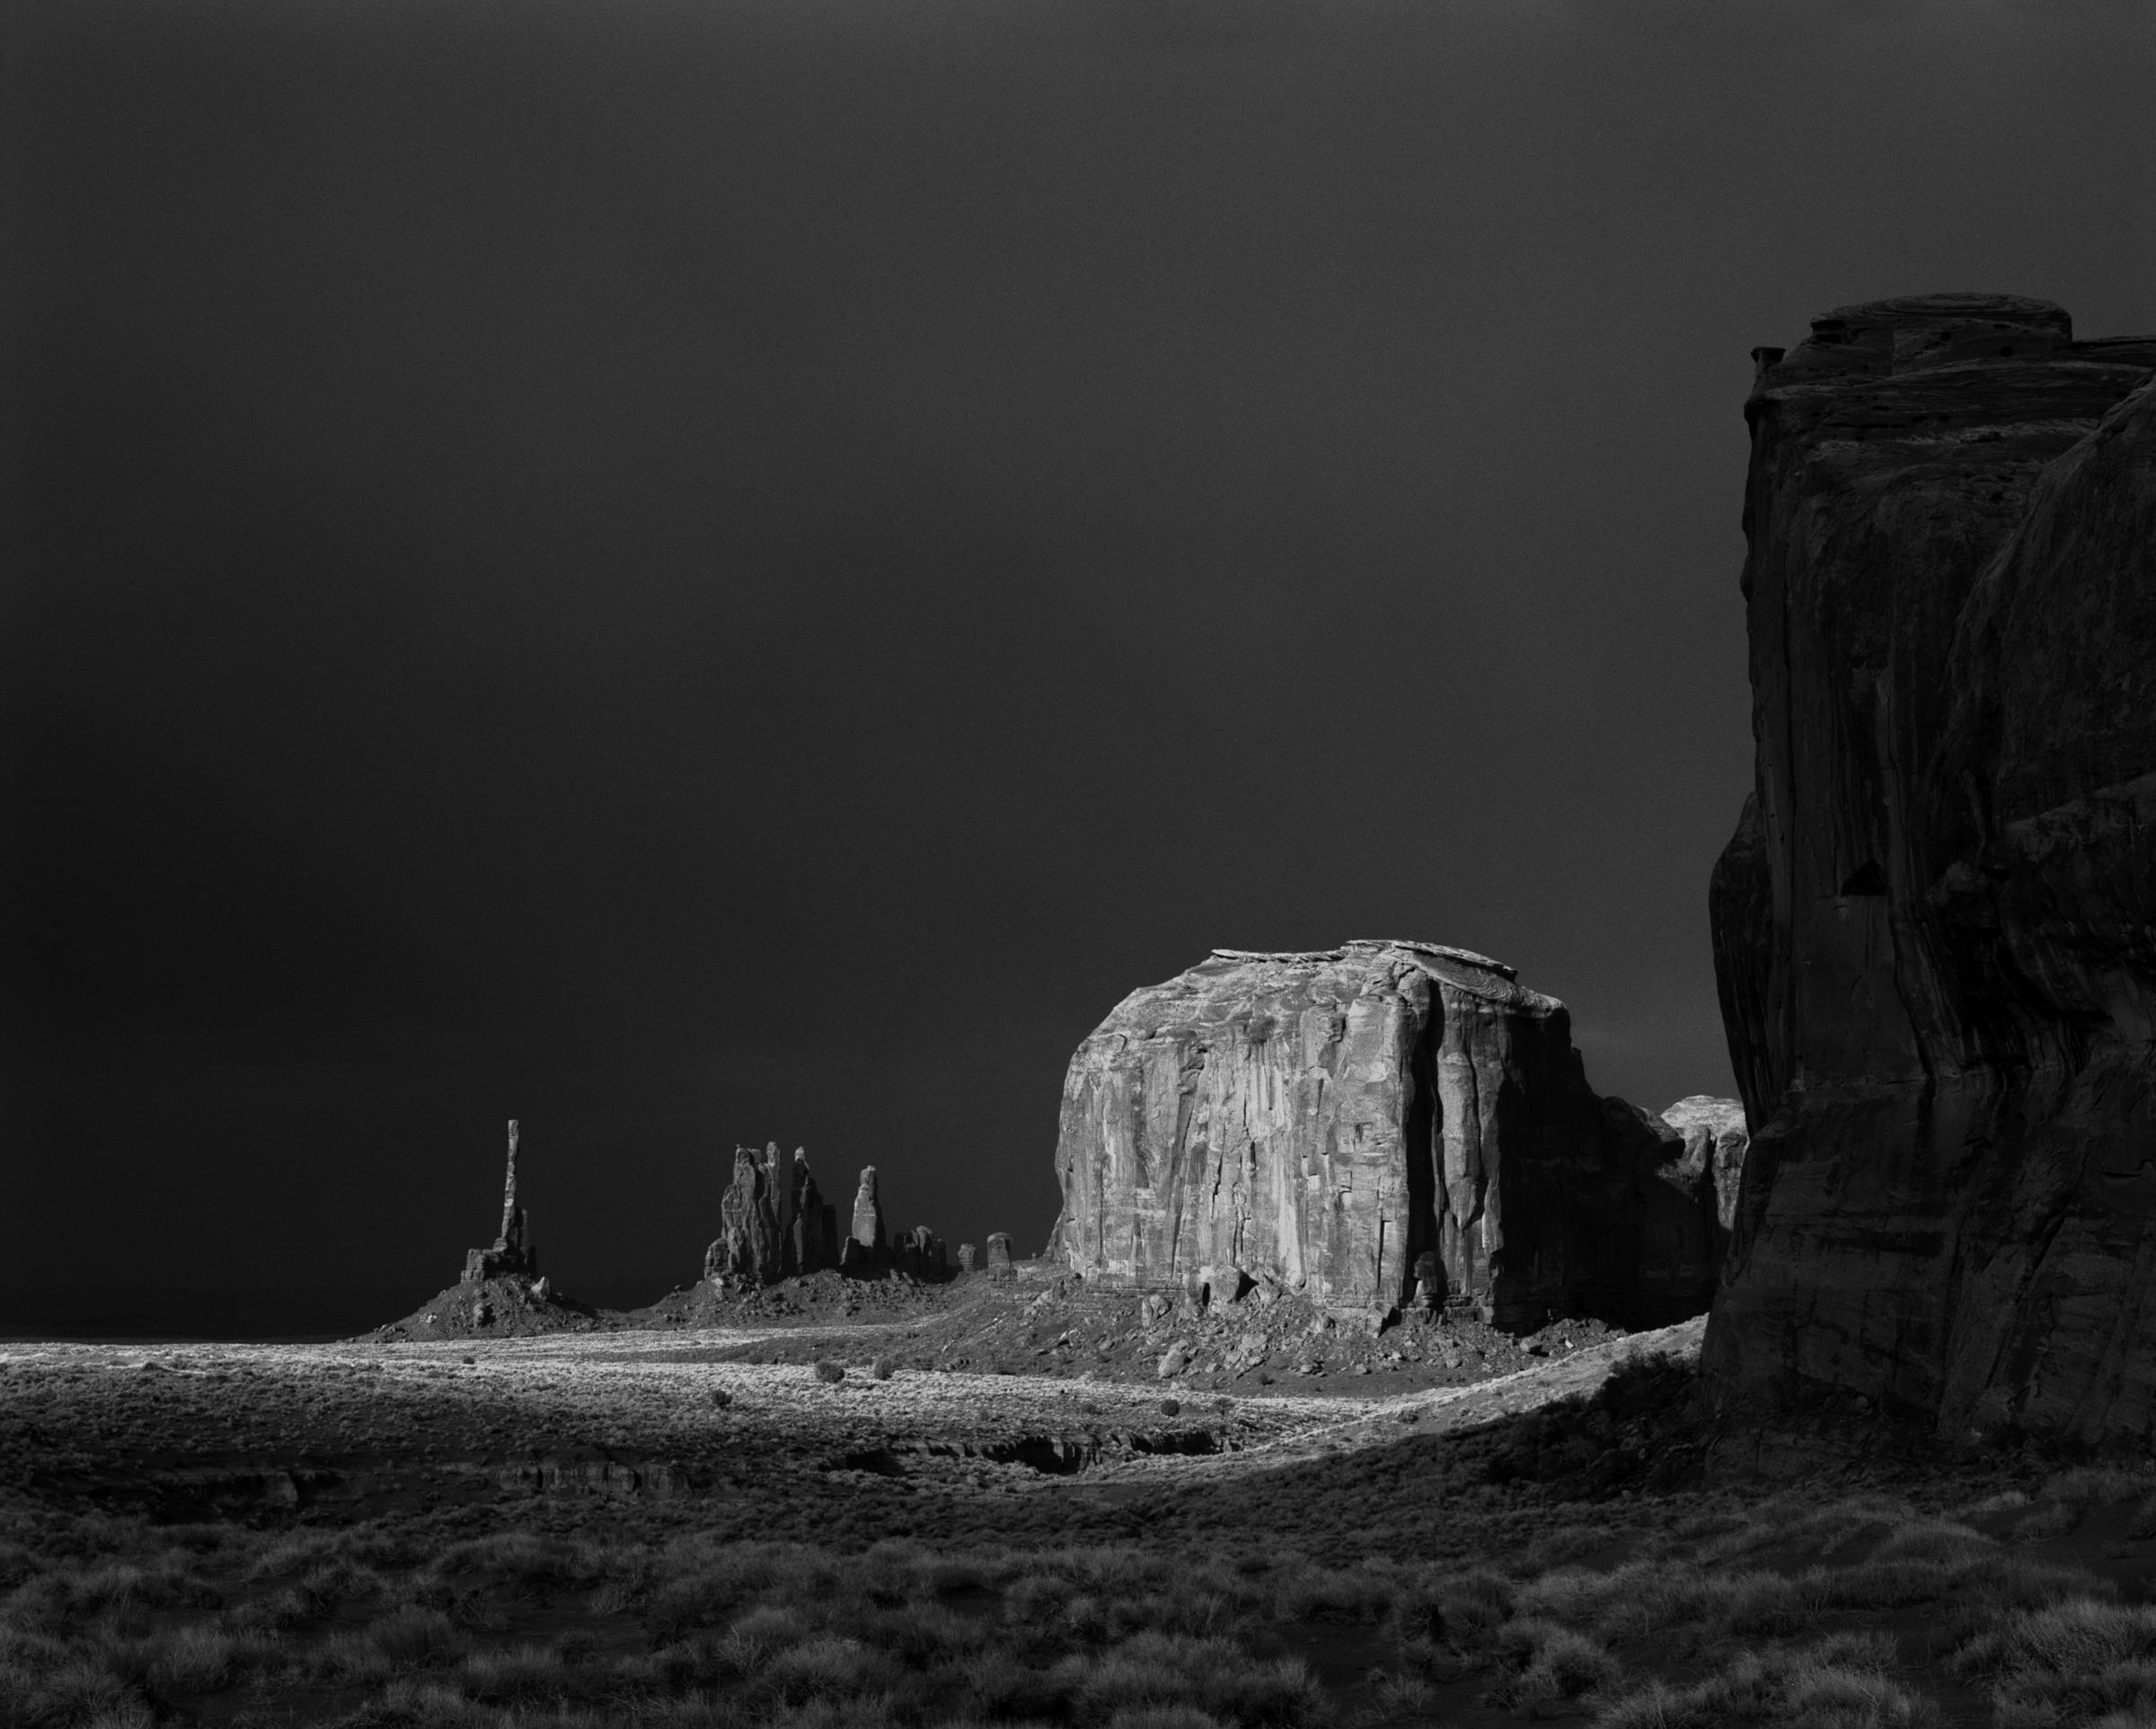 Kurt Markus, Monument Valley, 2011, Image Size: 17 x 20.5". Matted: 24 x 30", archival pigment ink print, edition of 25. Signed and editioned on print recto. Large scale landscape photograph of Monument Valley. Exhibited in Obscura Gallery solo